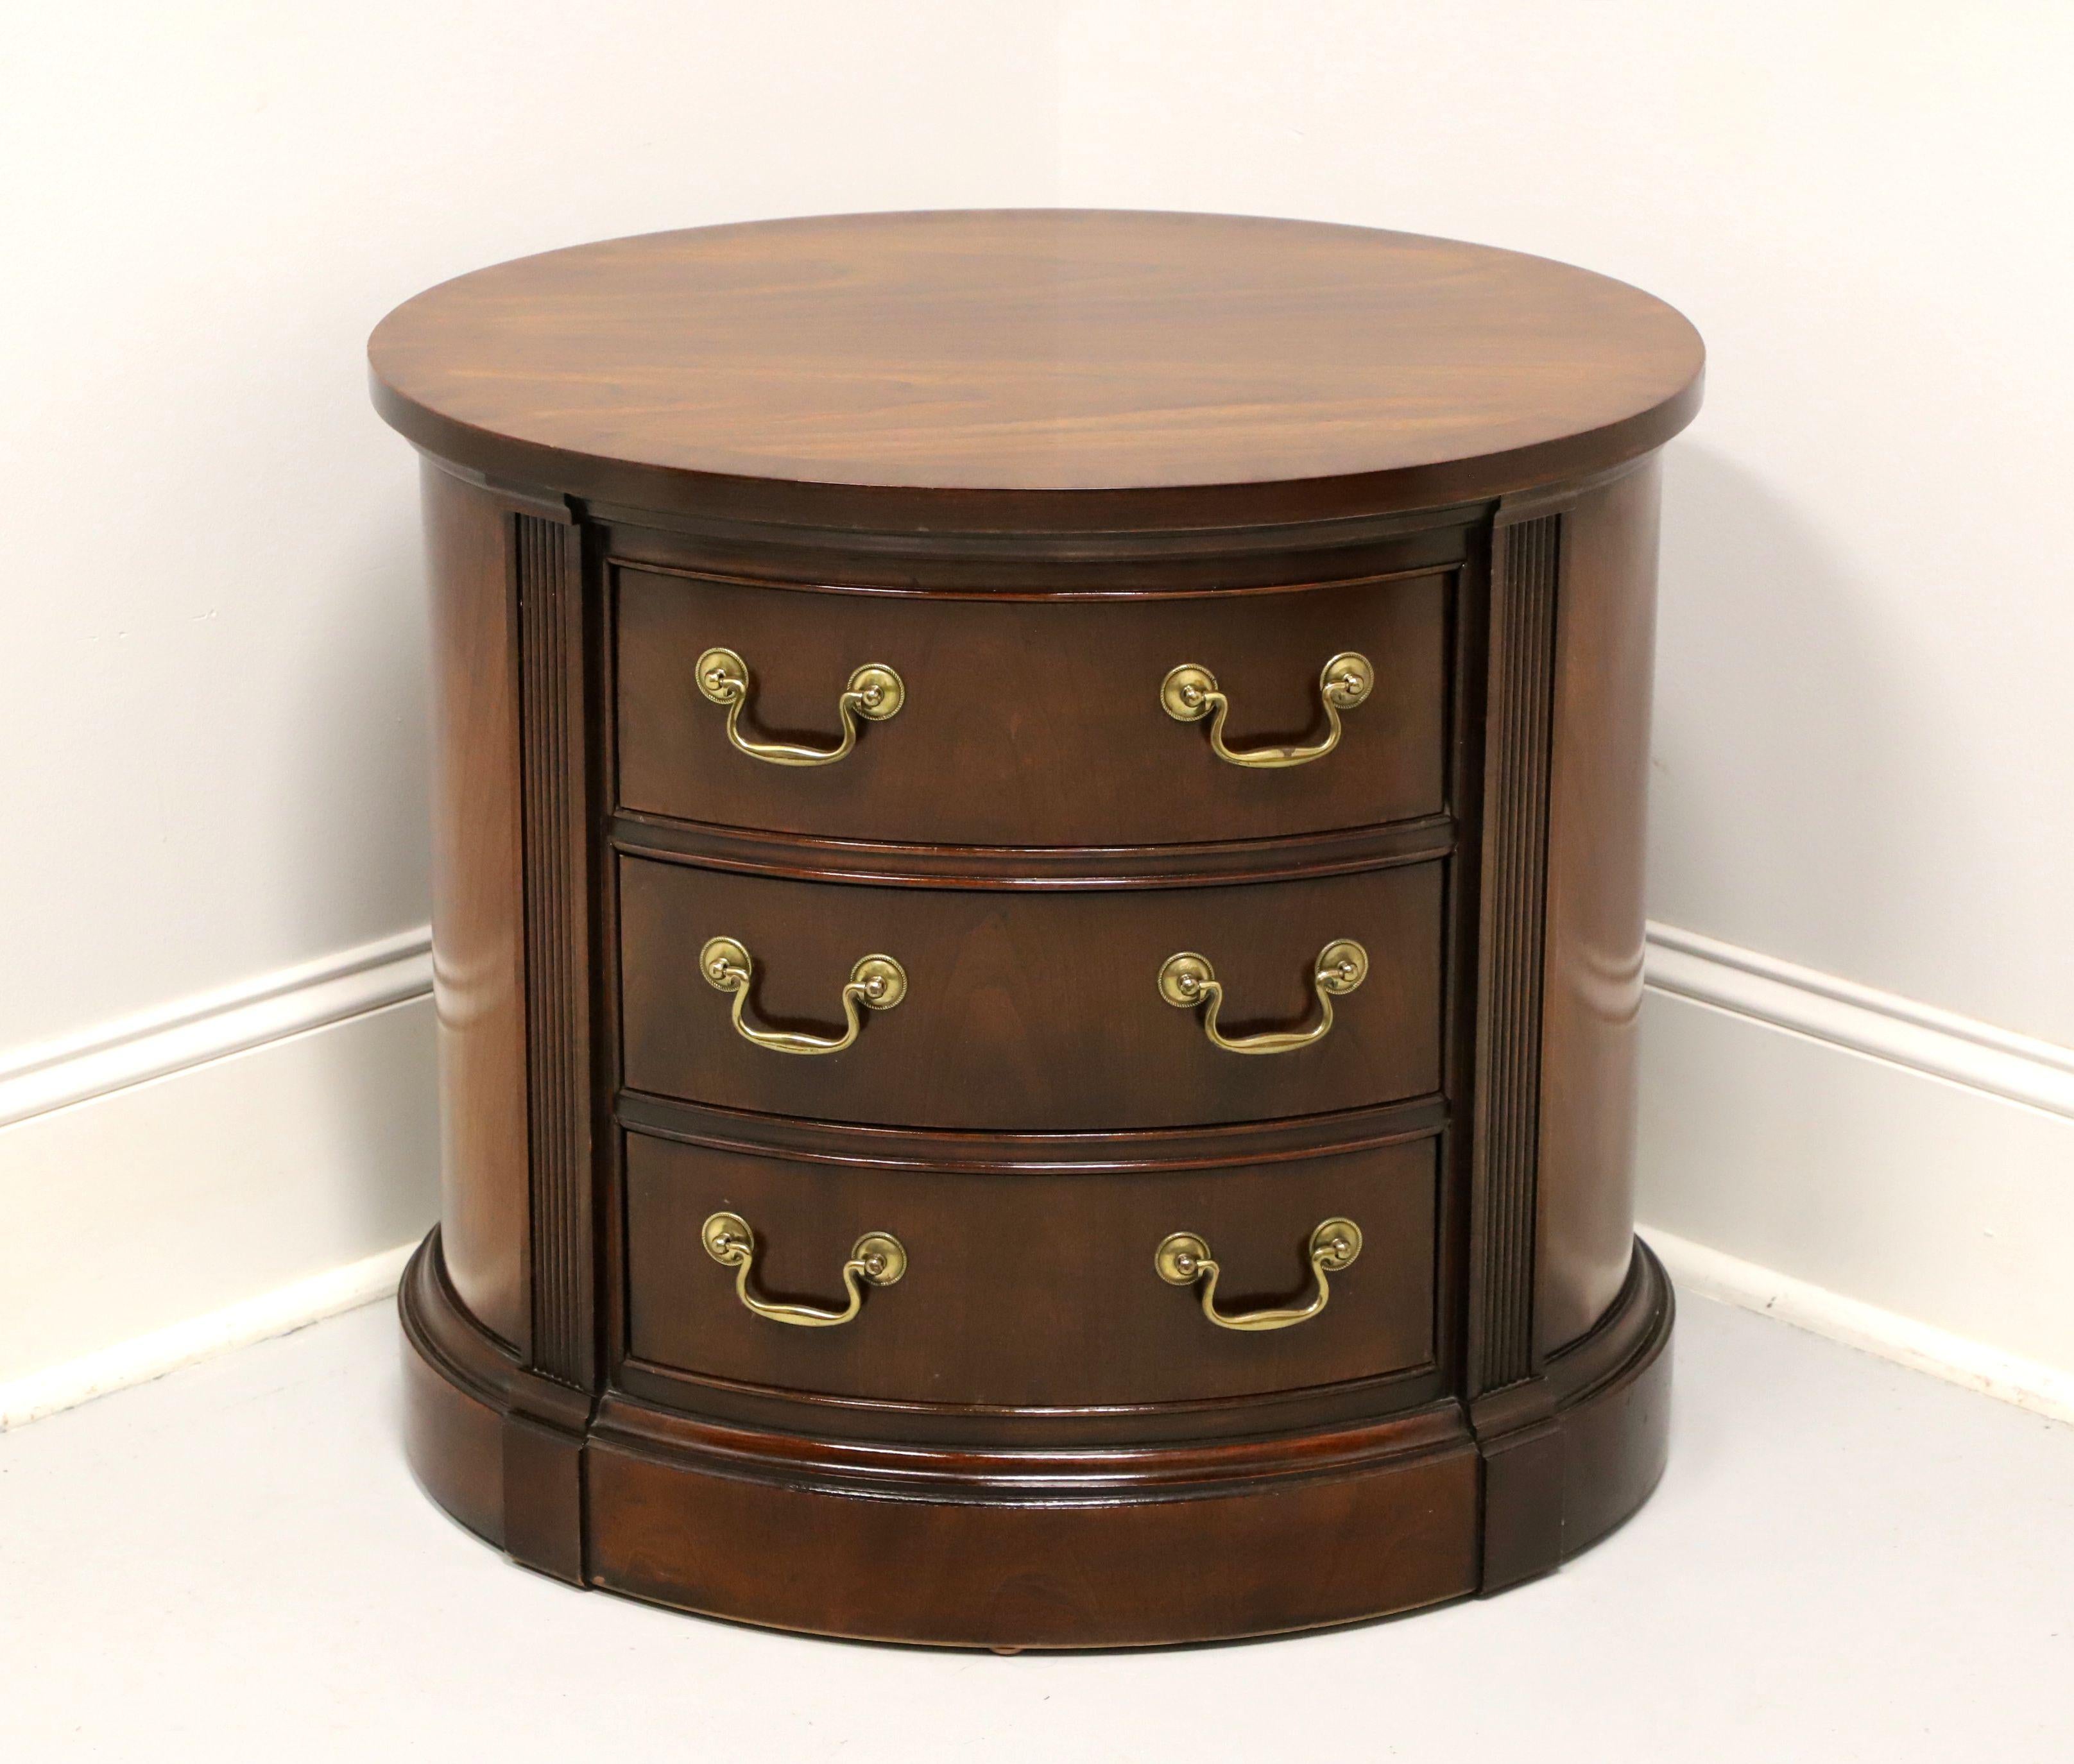 A Chippendale style oval shaped chairside chest by Thomasville. Mahogany with fluted column accents flanking drawers, brass hardware, fully finished back, and a solid base. Features three drawers of dovetail construction. Made in North Carolina,